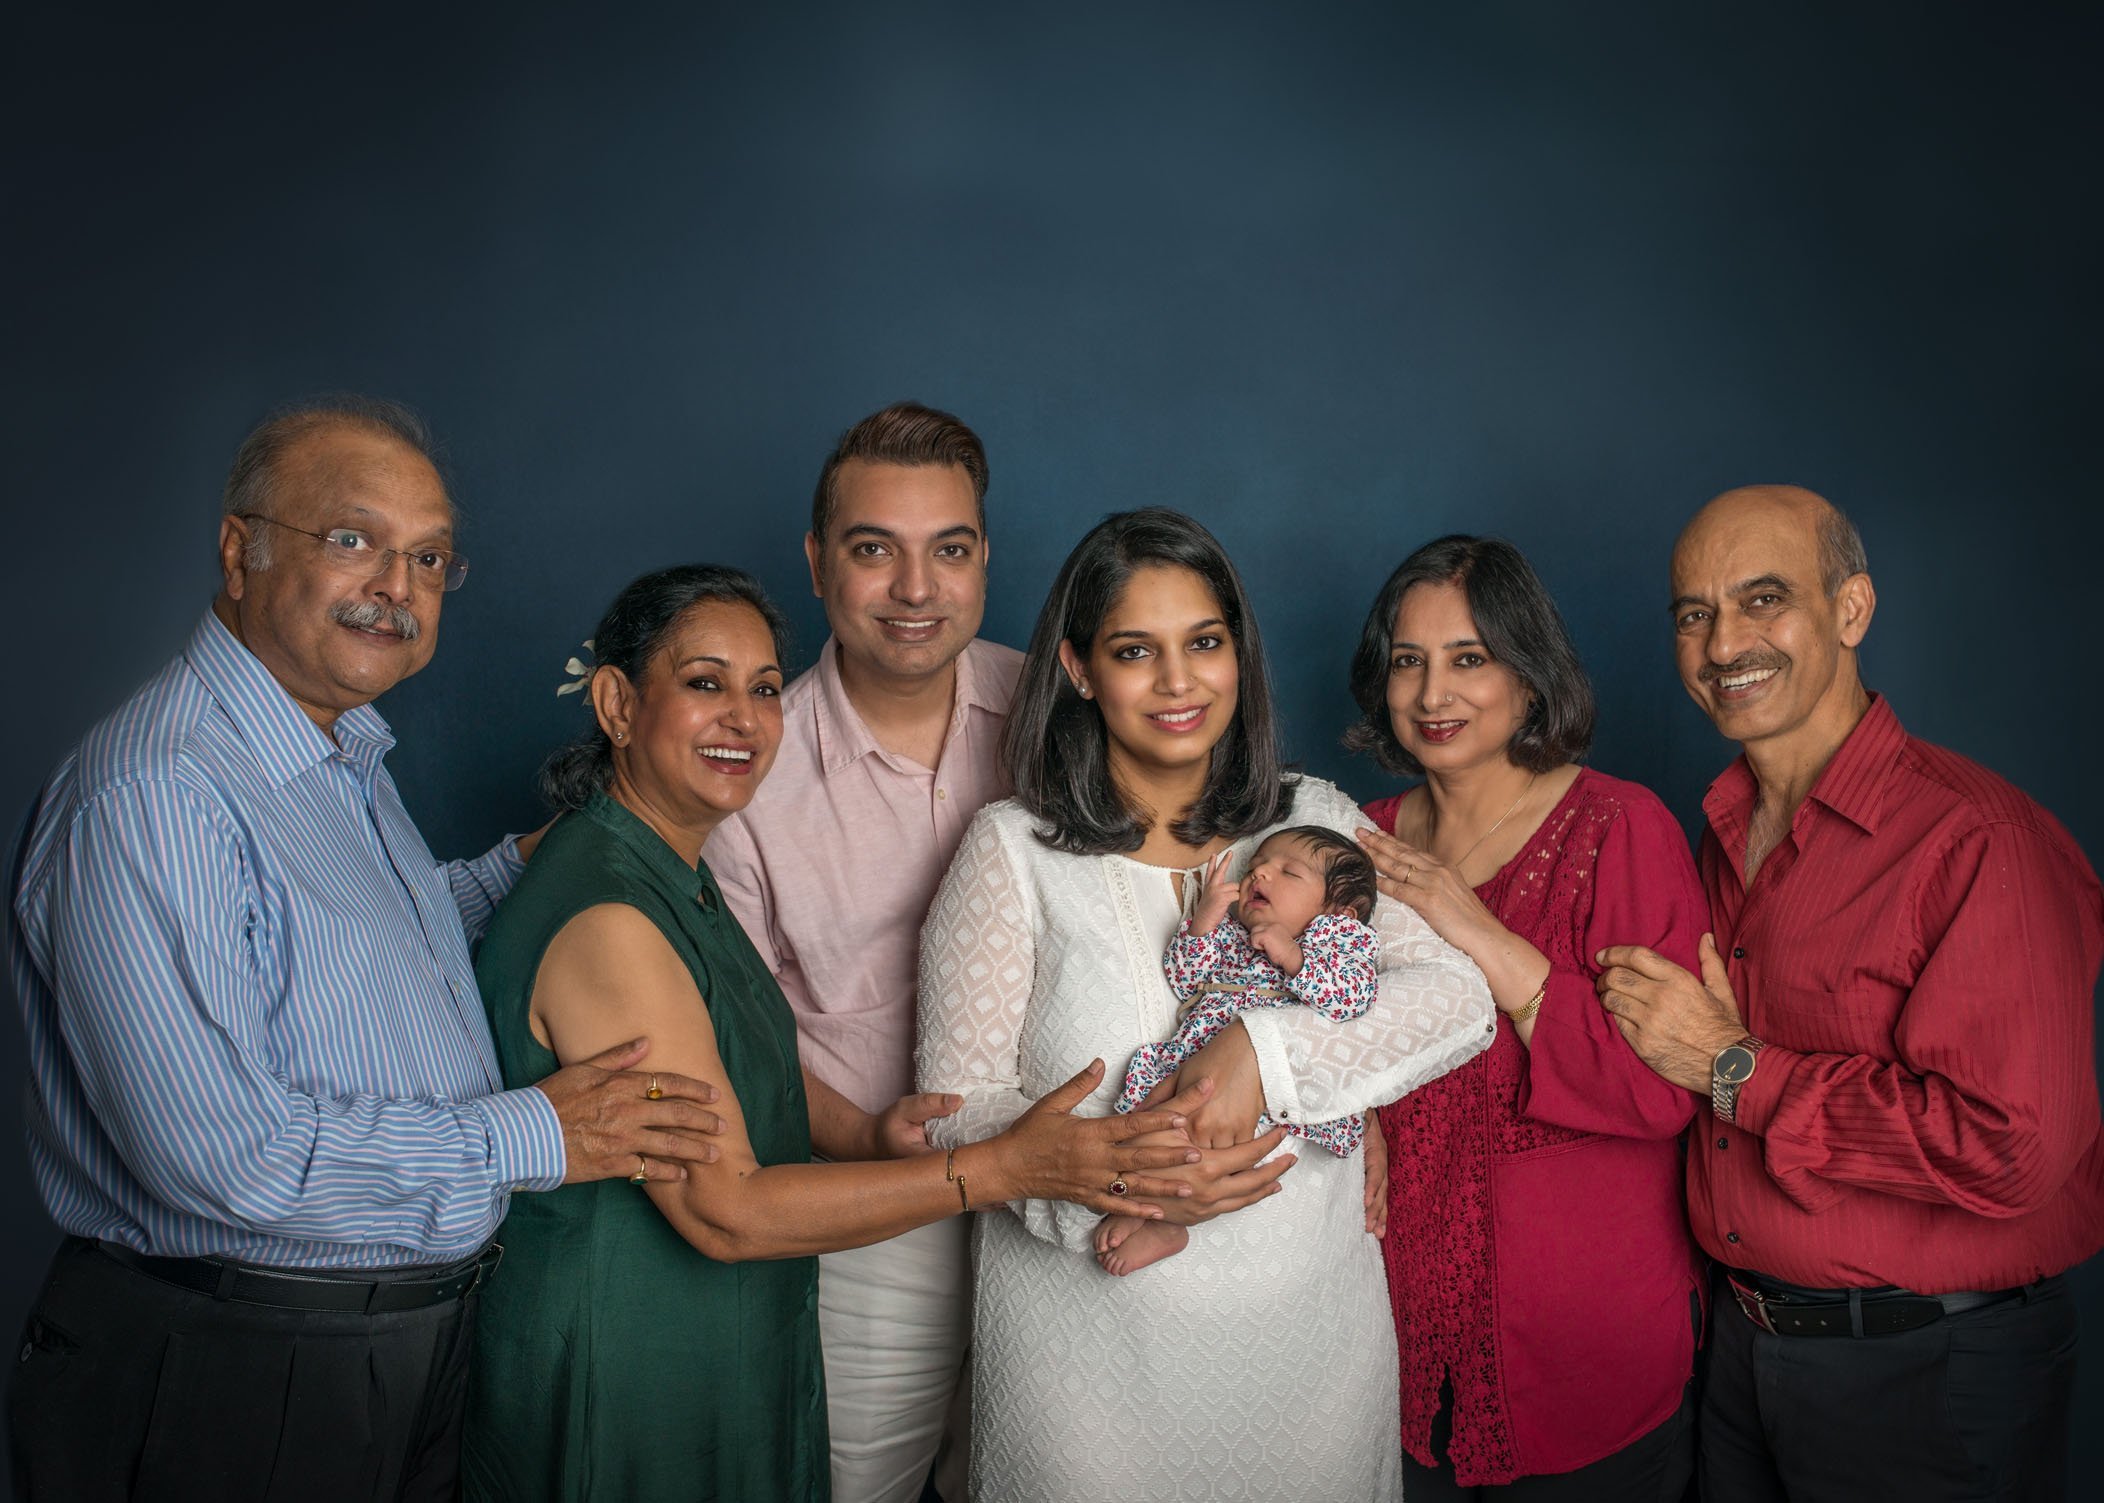 All grandparents, parents and newborn baby